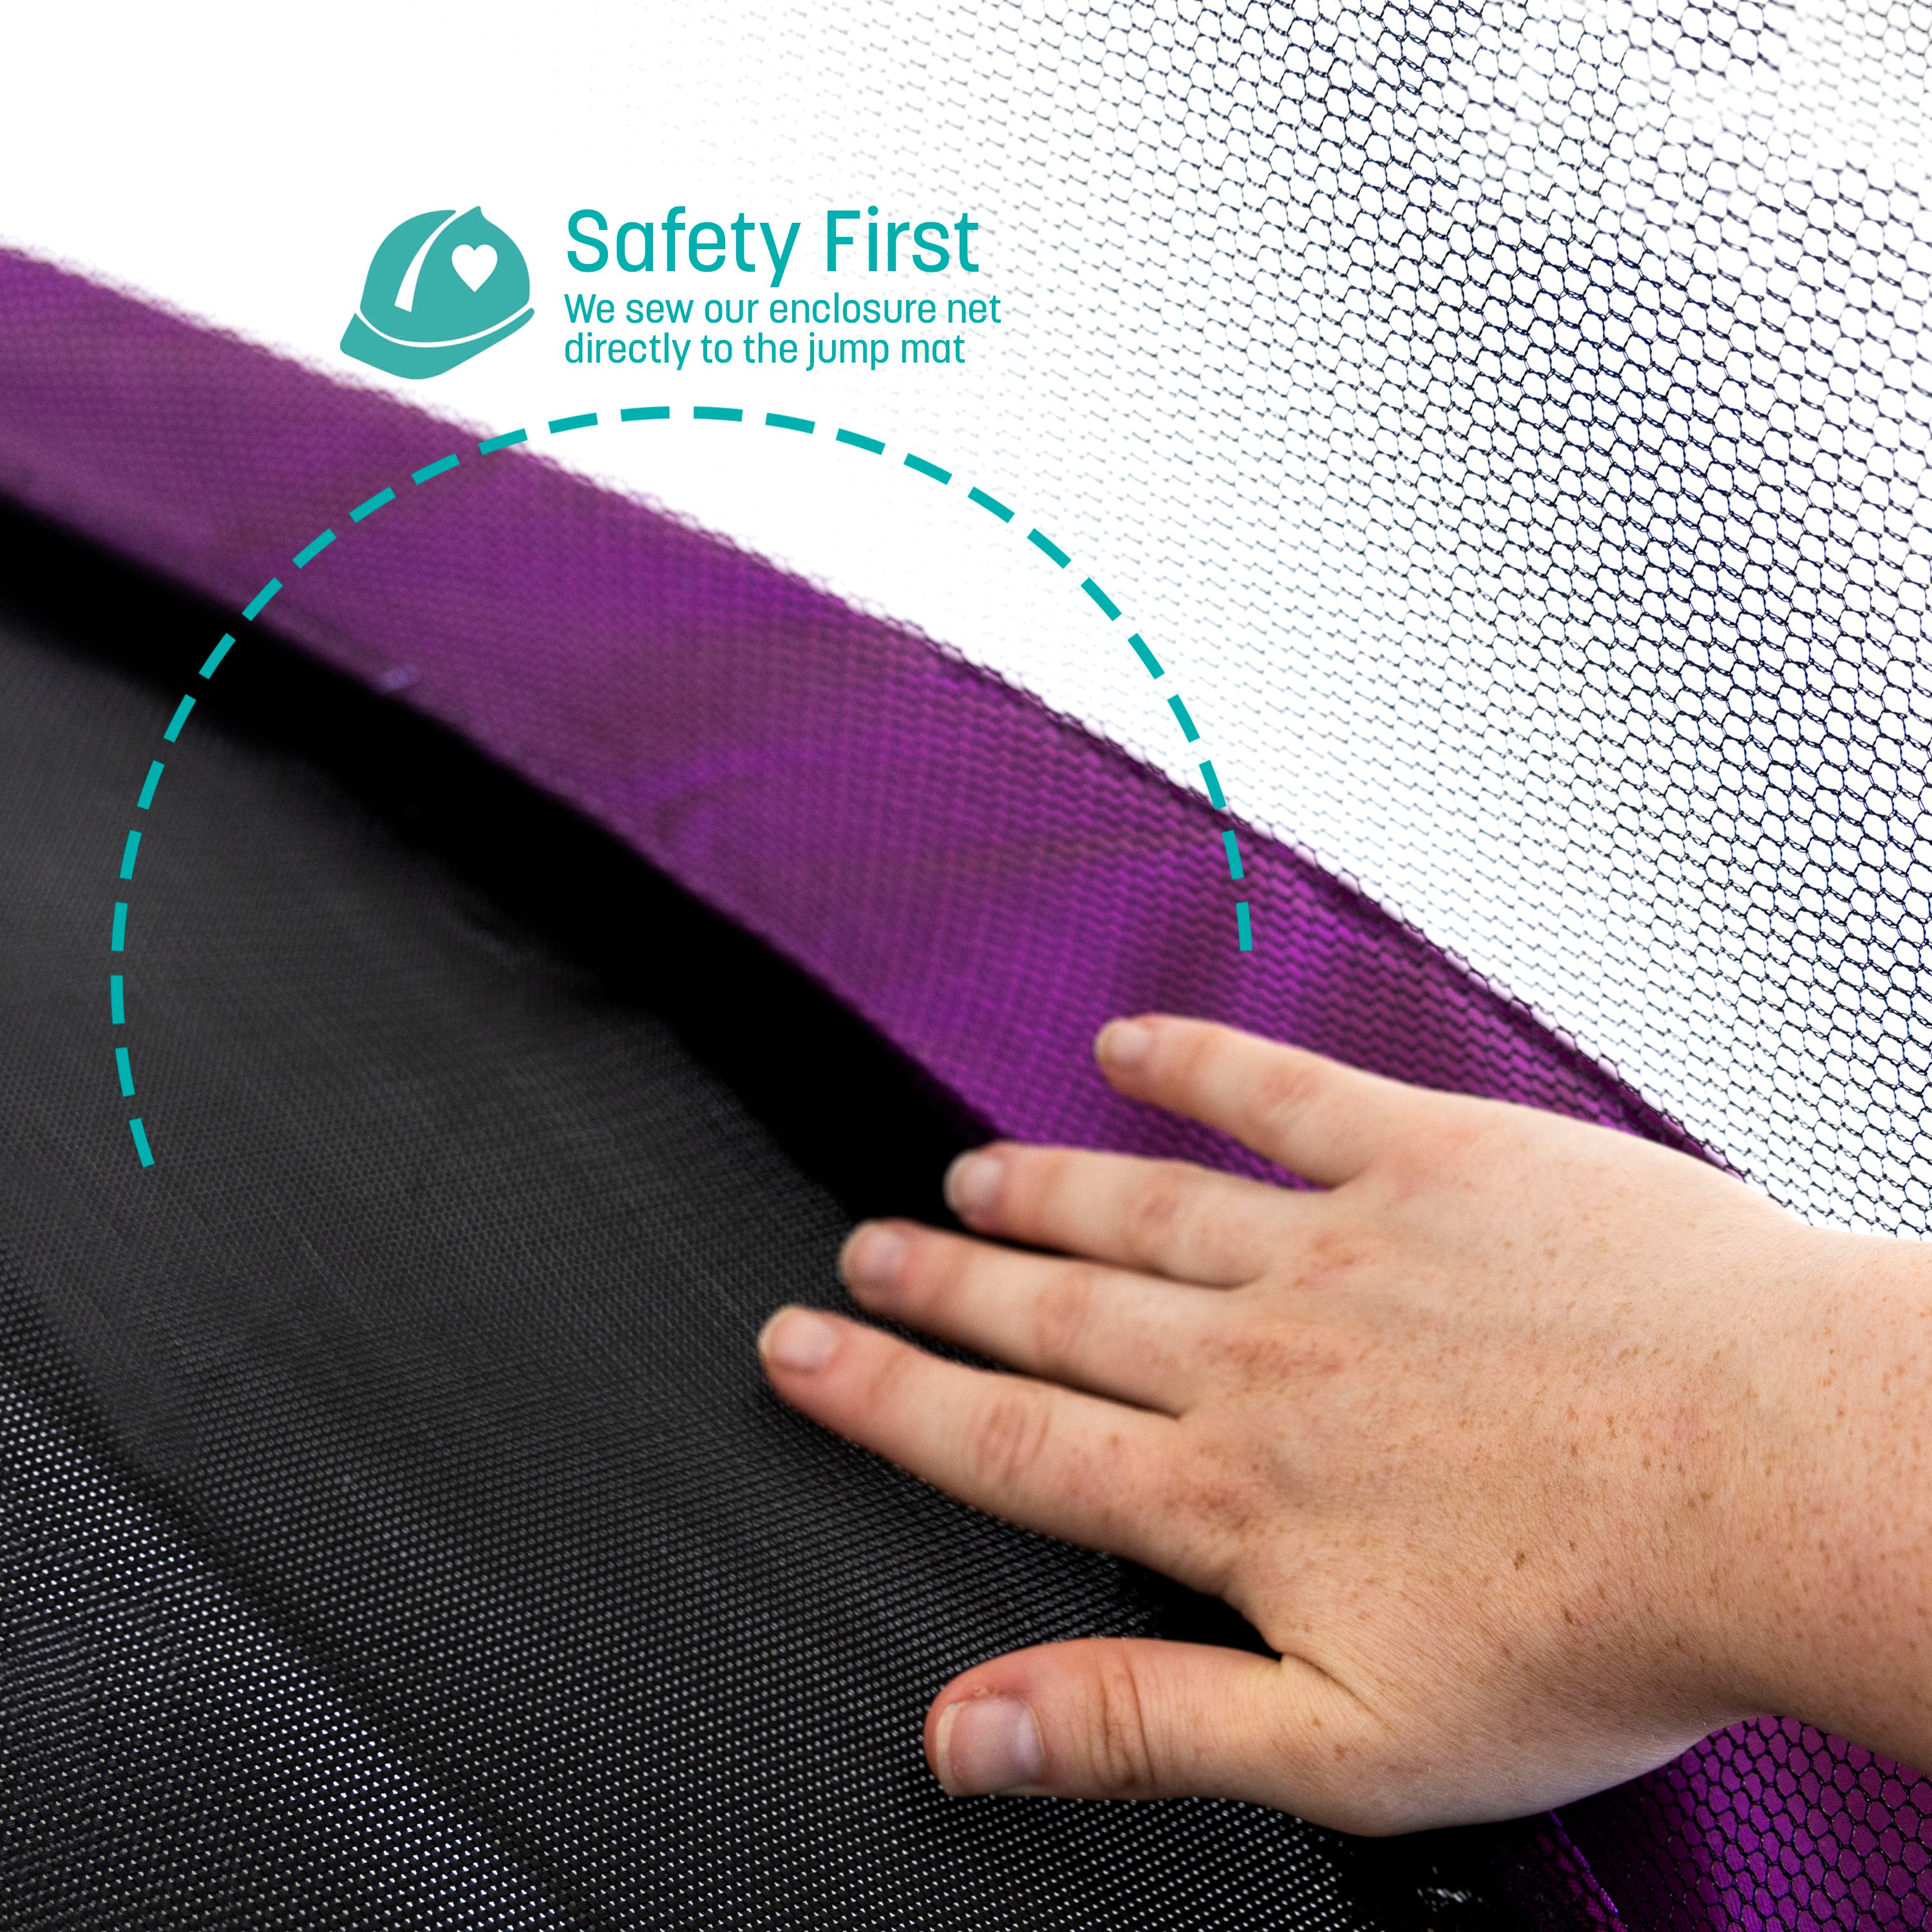 A hand pushes back on the enclosure net. A callout feature states, “Safety First: We sew our enclosure net directly to the jump mat”.